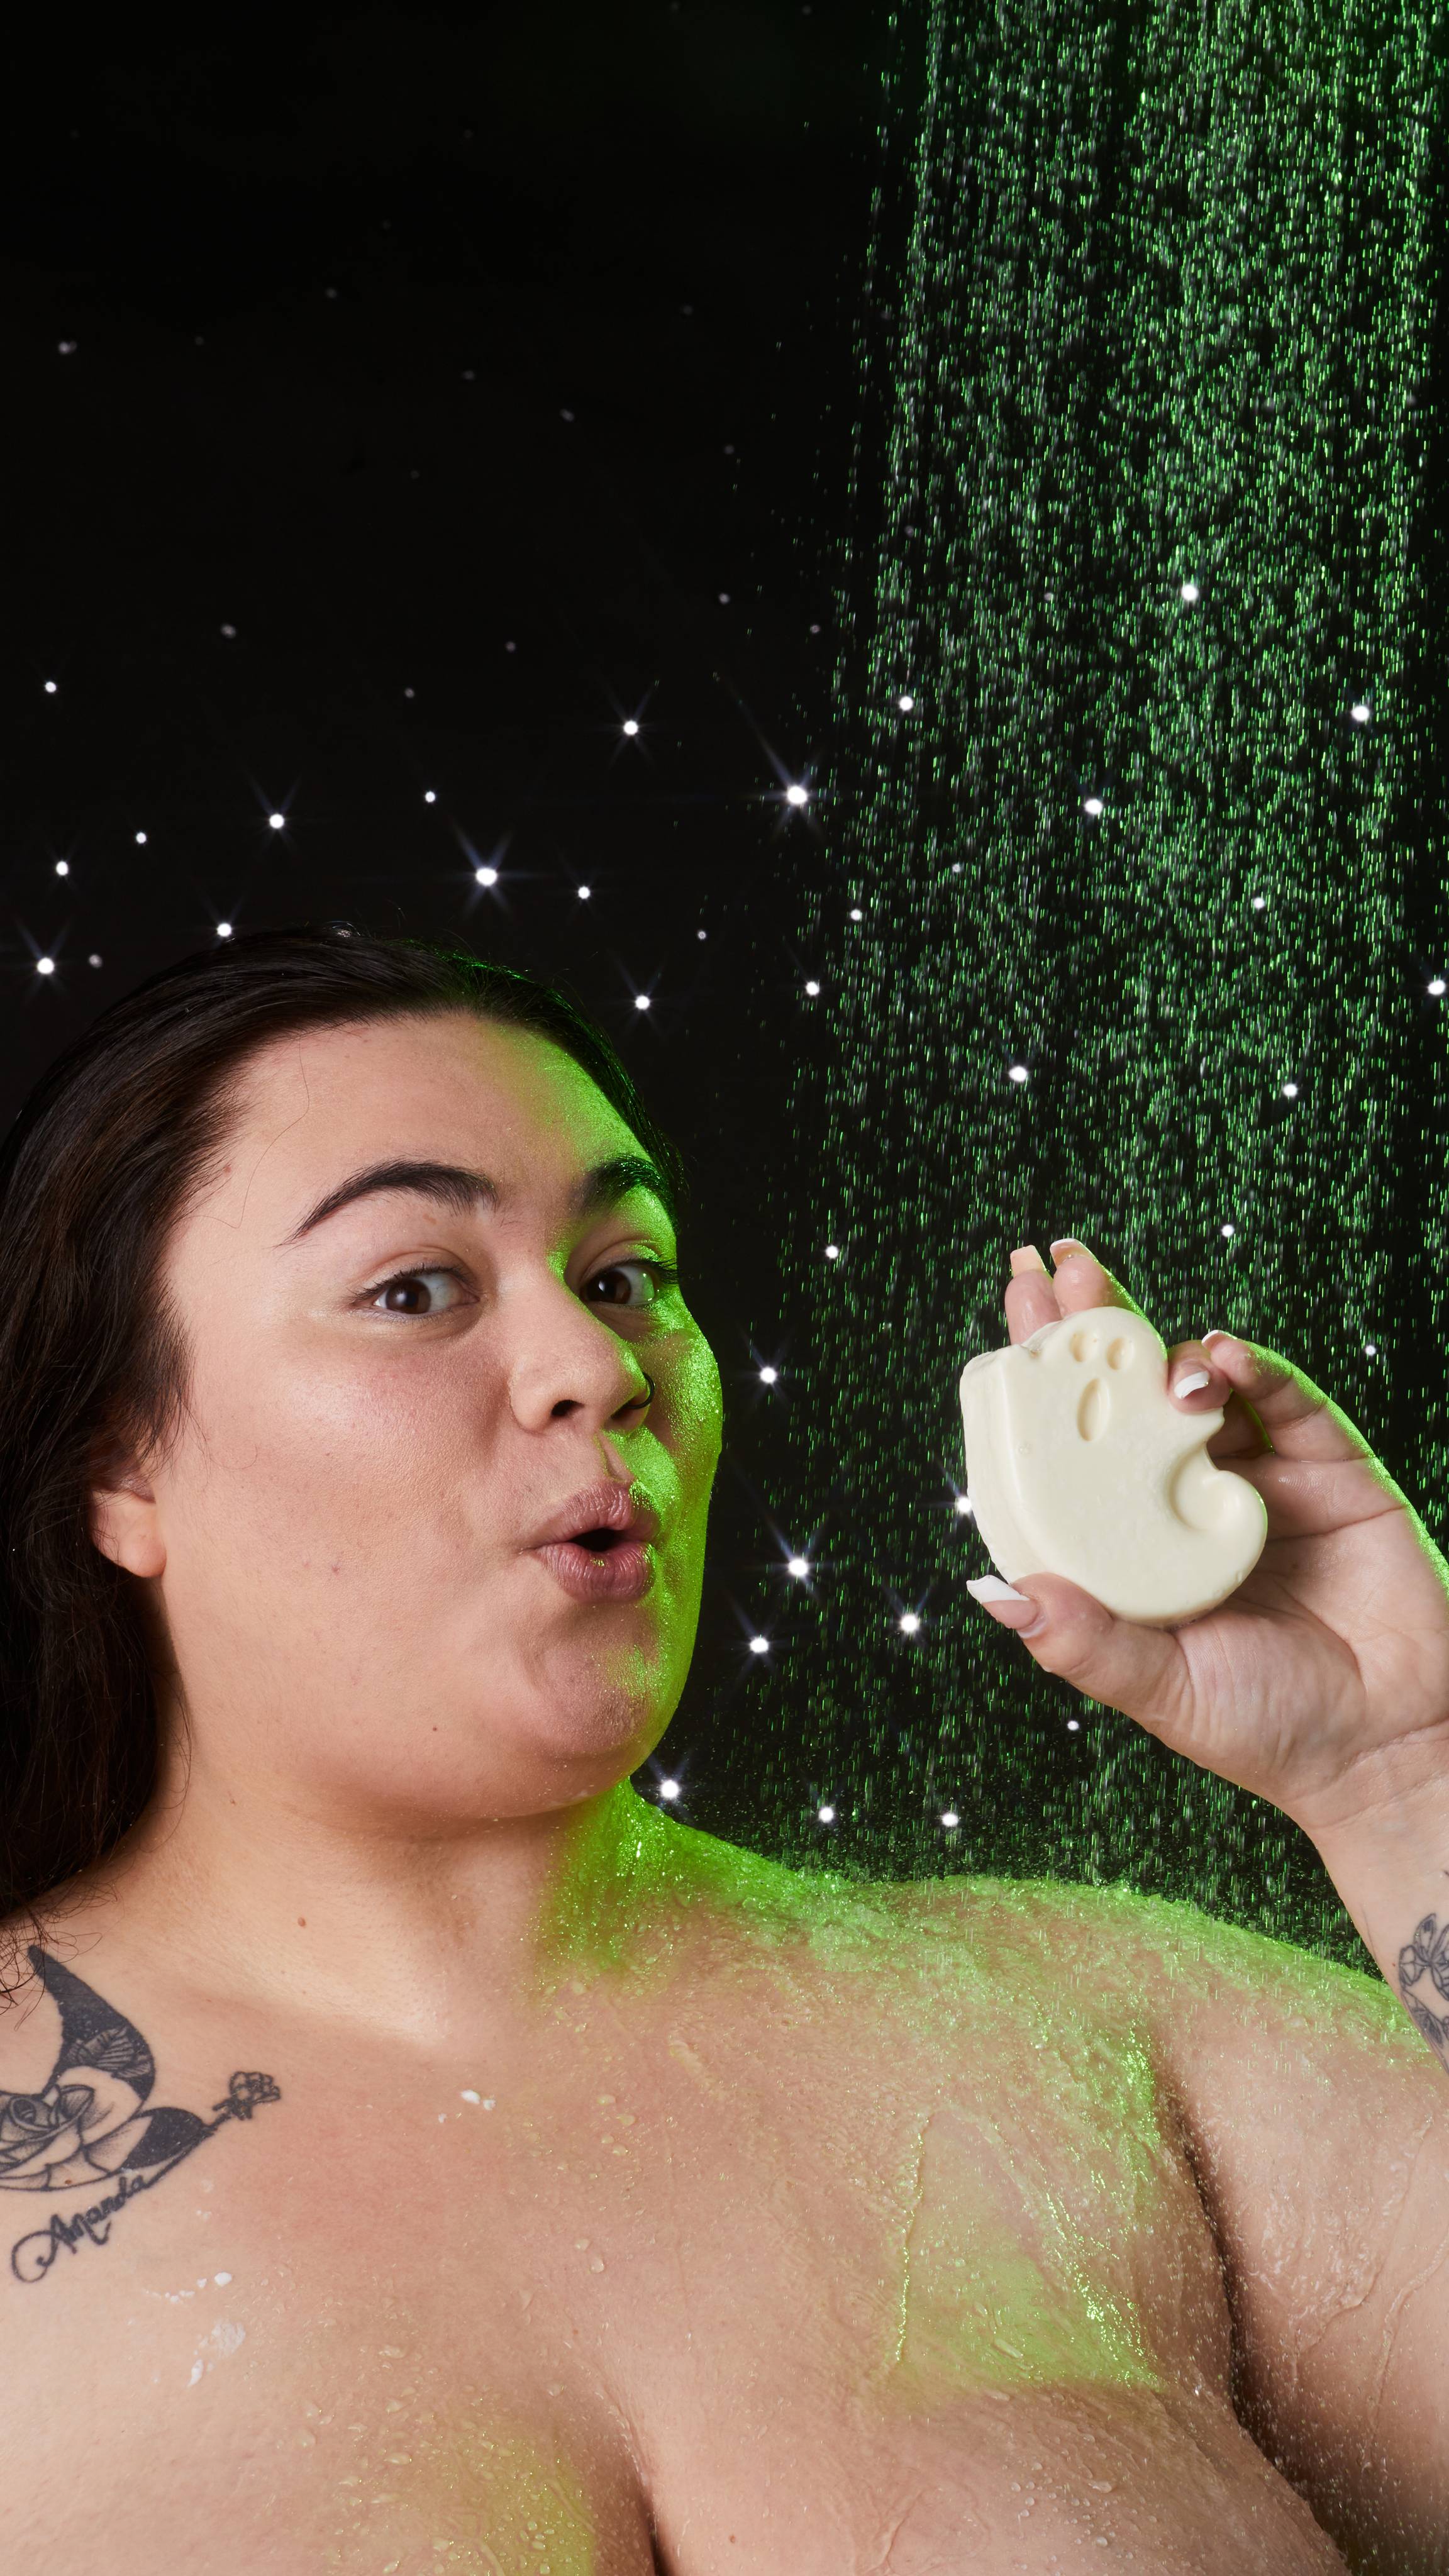 Model is in the shower holding the Ghost in the Dark soap up by their face where they are making a fun, shocked face.